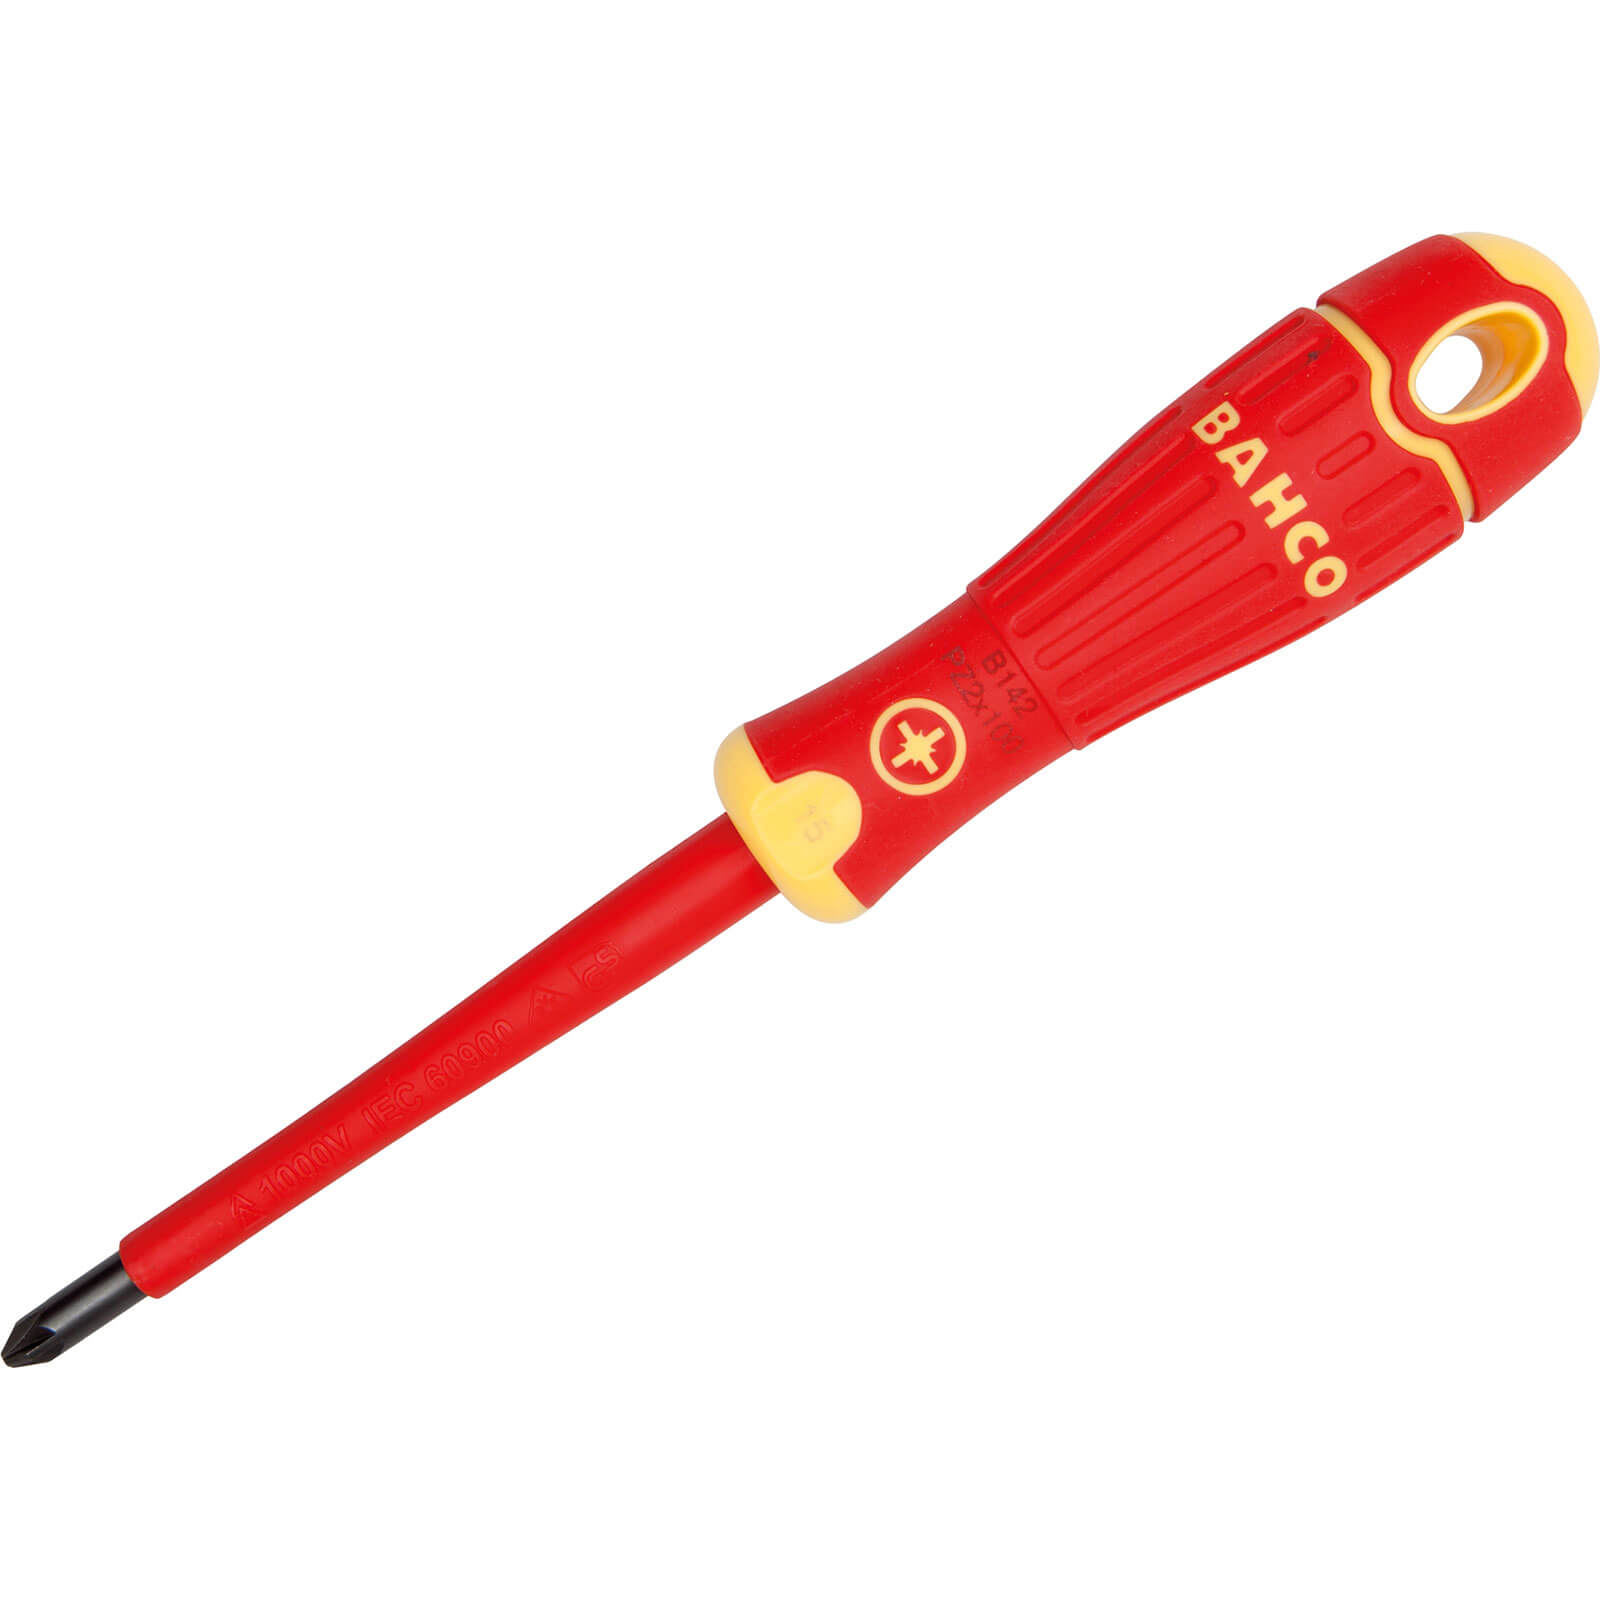 Photo of Bahco Vde Insulated Pozi Screwdriver Pz1 80mm